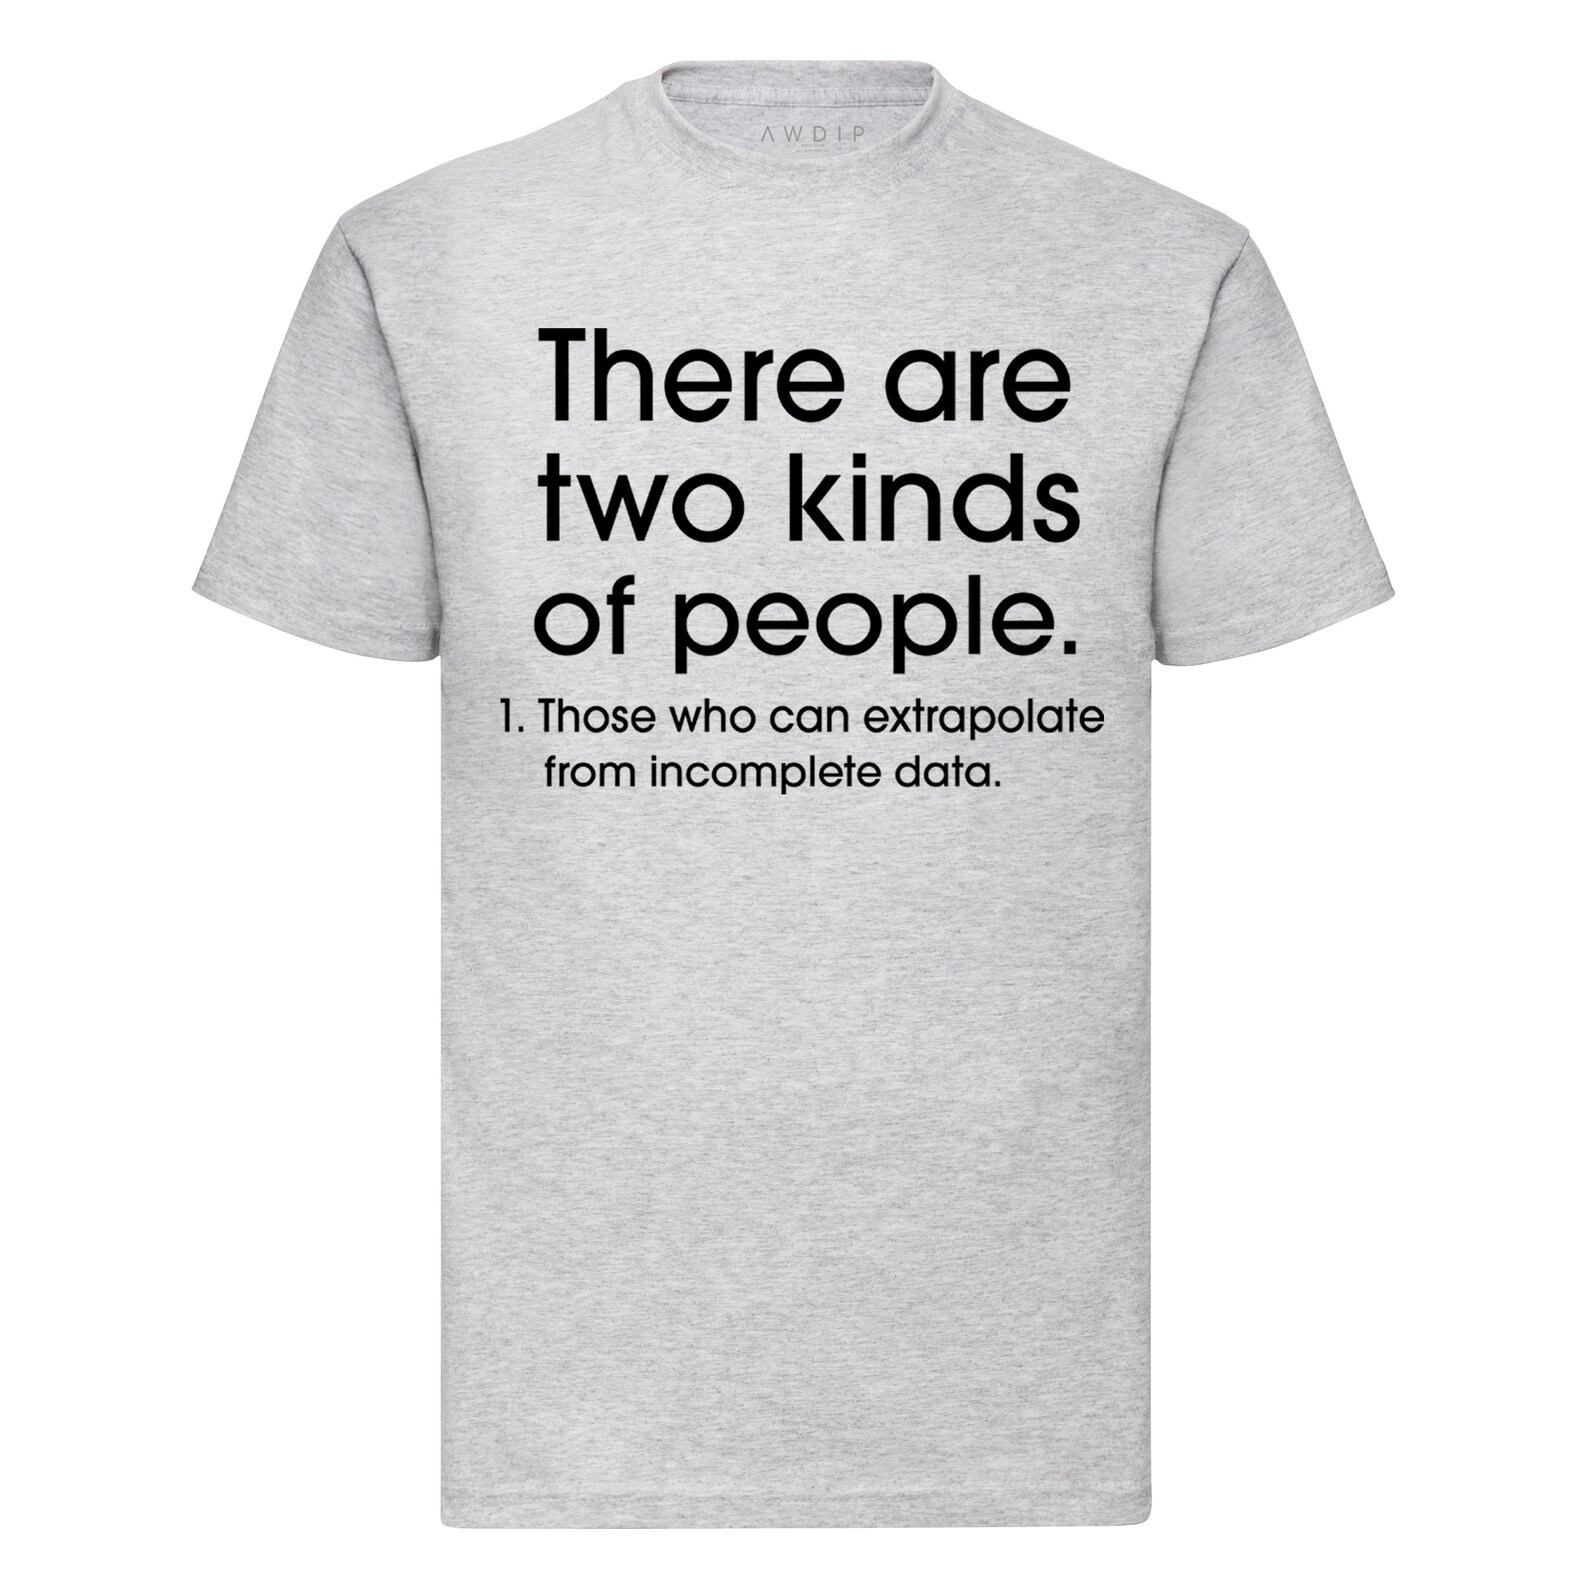 There are two kinds of people T-Shirt Funny Sarcasm Joke Gift | Etsy